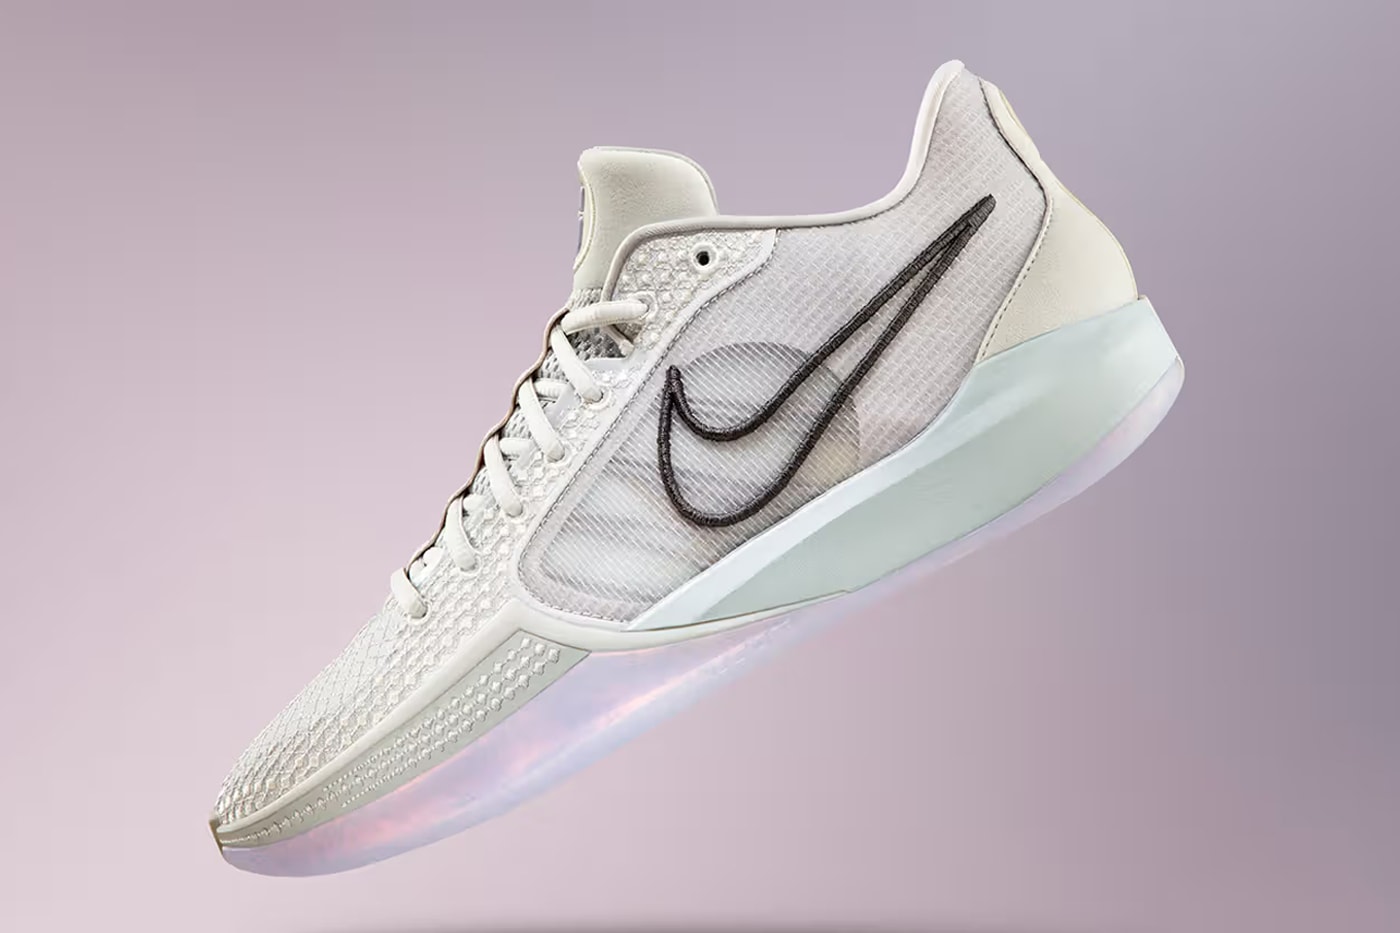 nike sabrina ionescu 1 apparel basketball signature shoe release date info store list buying guide photos price apparel tee hoodie socks 